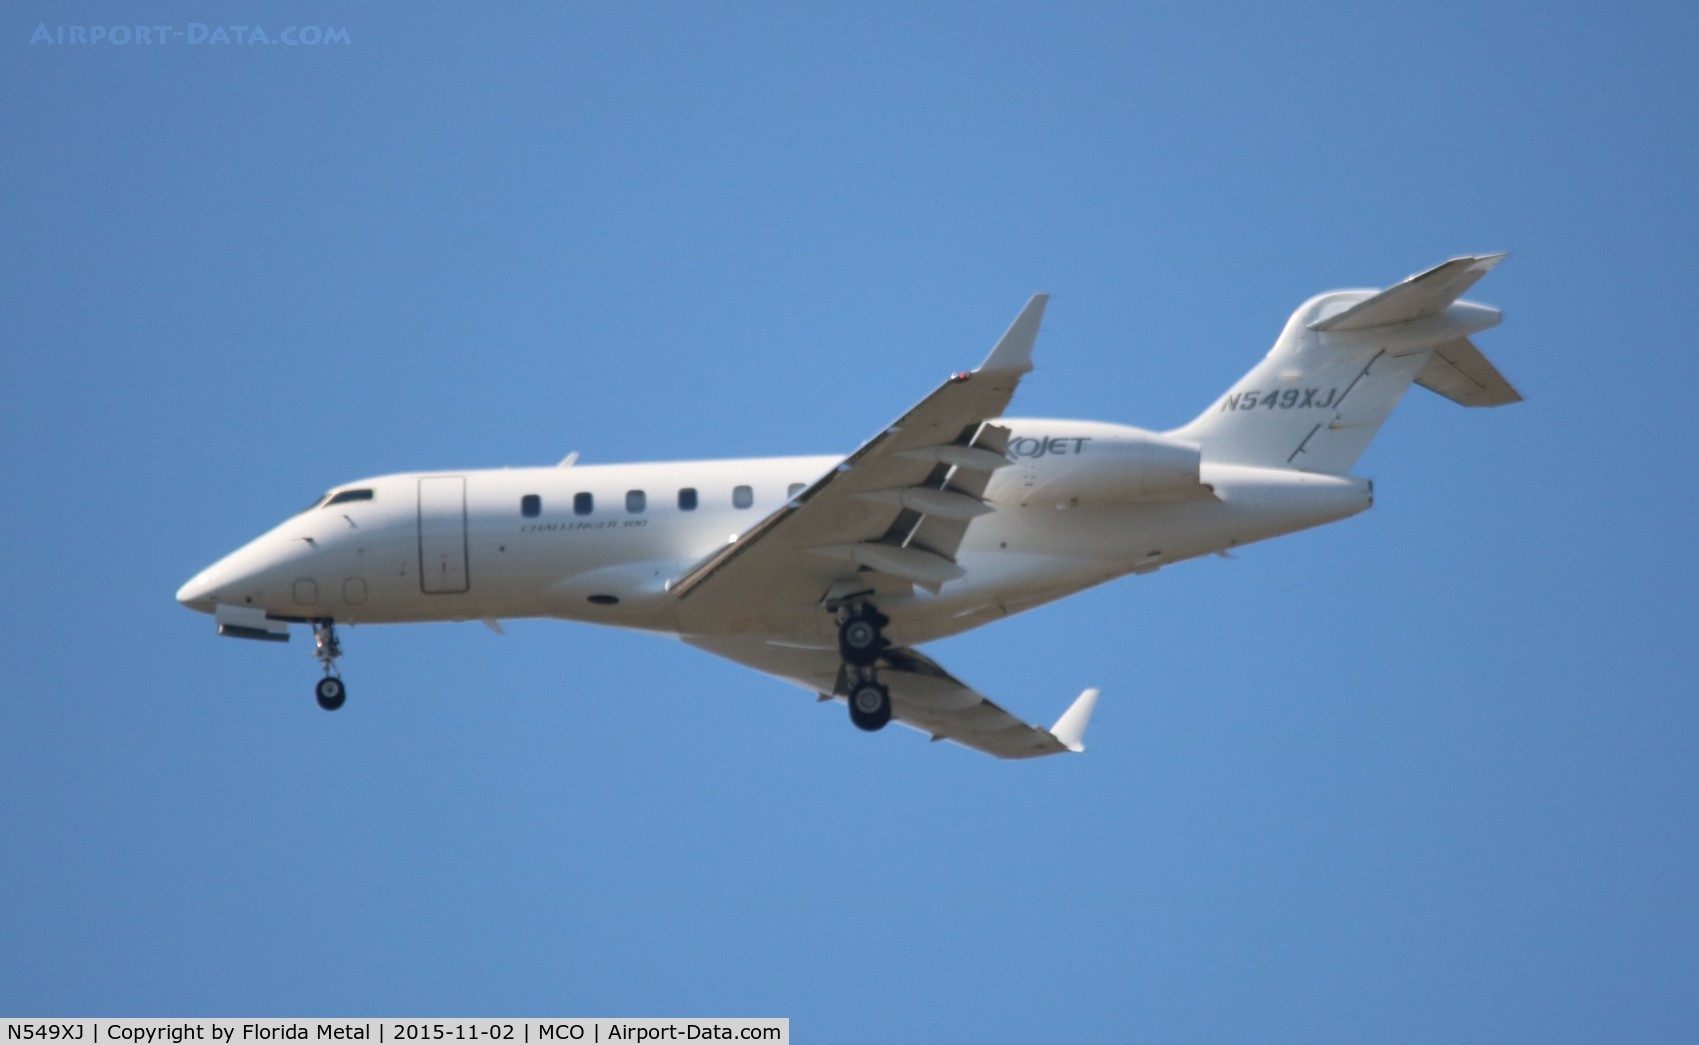 N549XJ, 2011 Bombardier Challenger 300 (BD-100-1A10) C/N 20322, Challenger 300